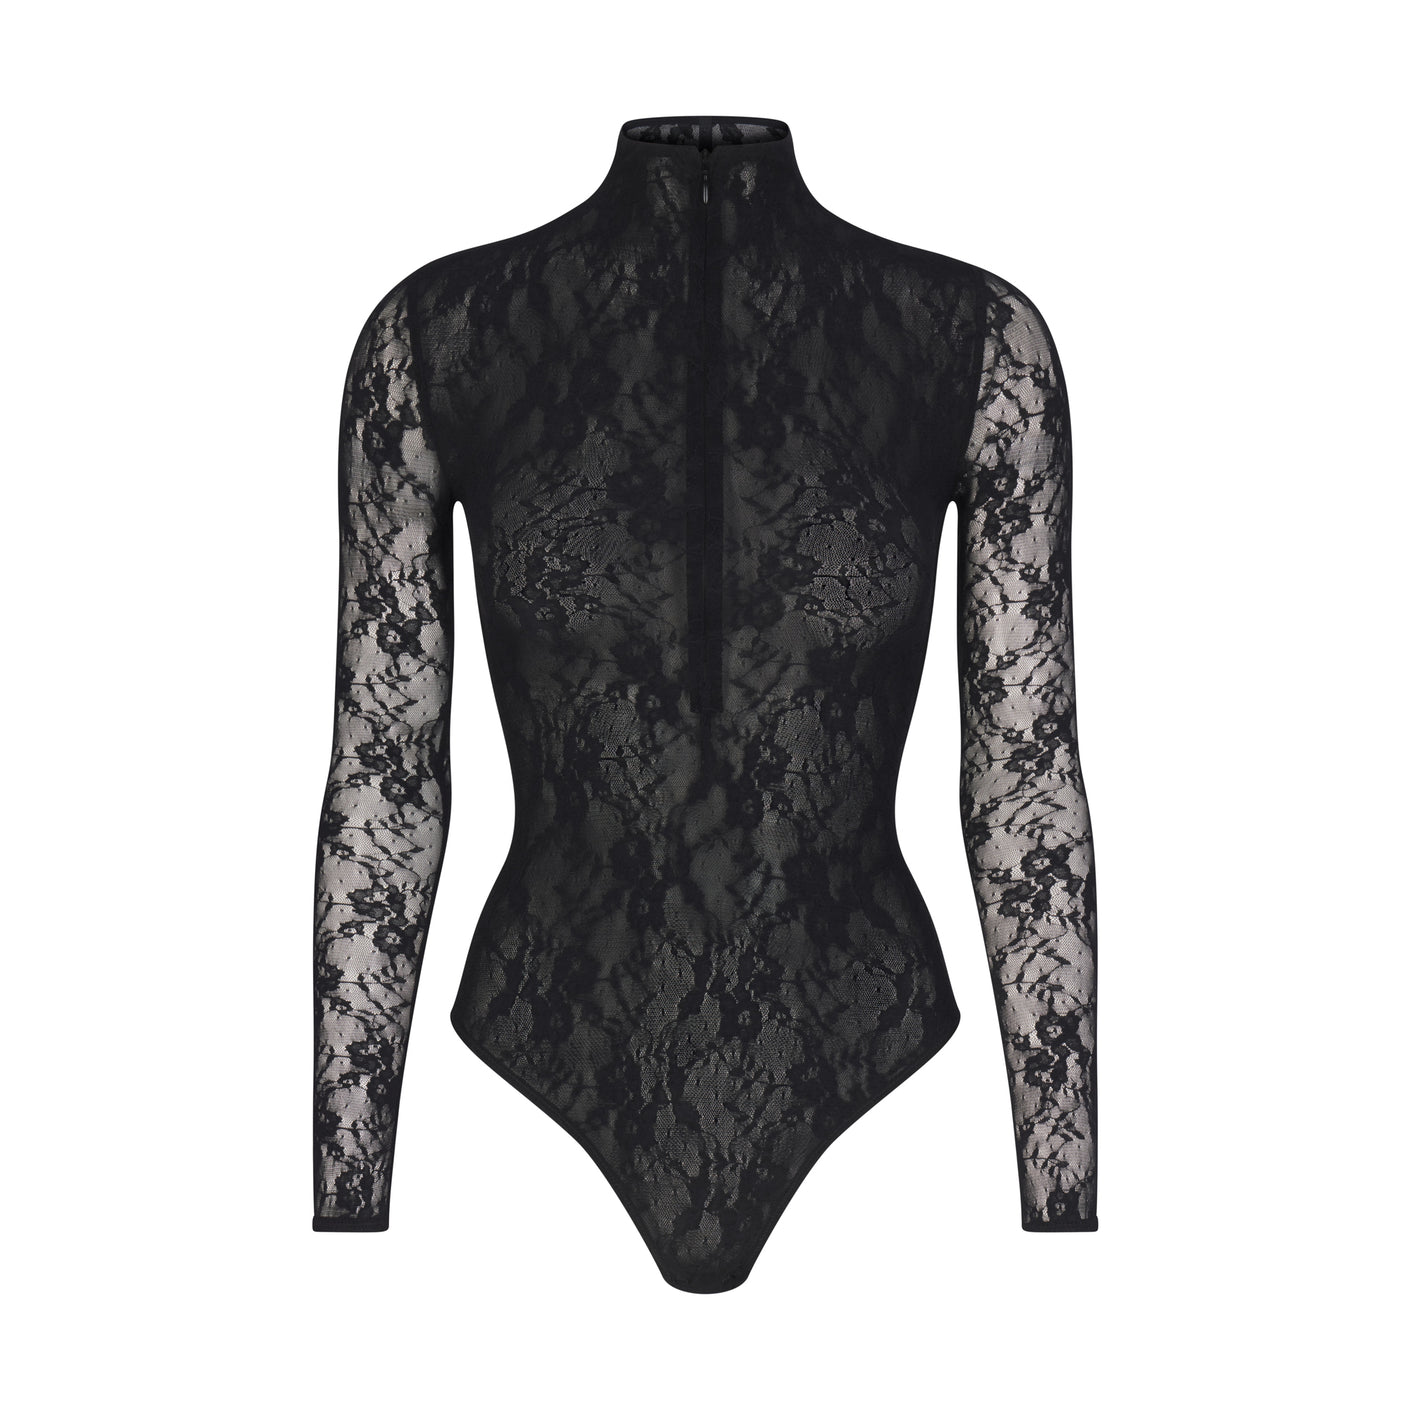 STRETCH LACE LINED LONG SLEEVE THONG BODYSUIT | ONYX